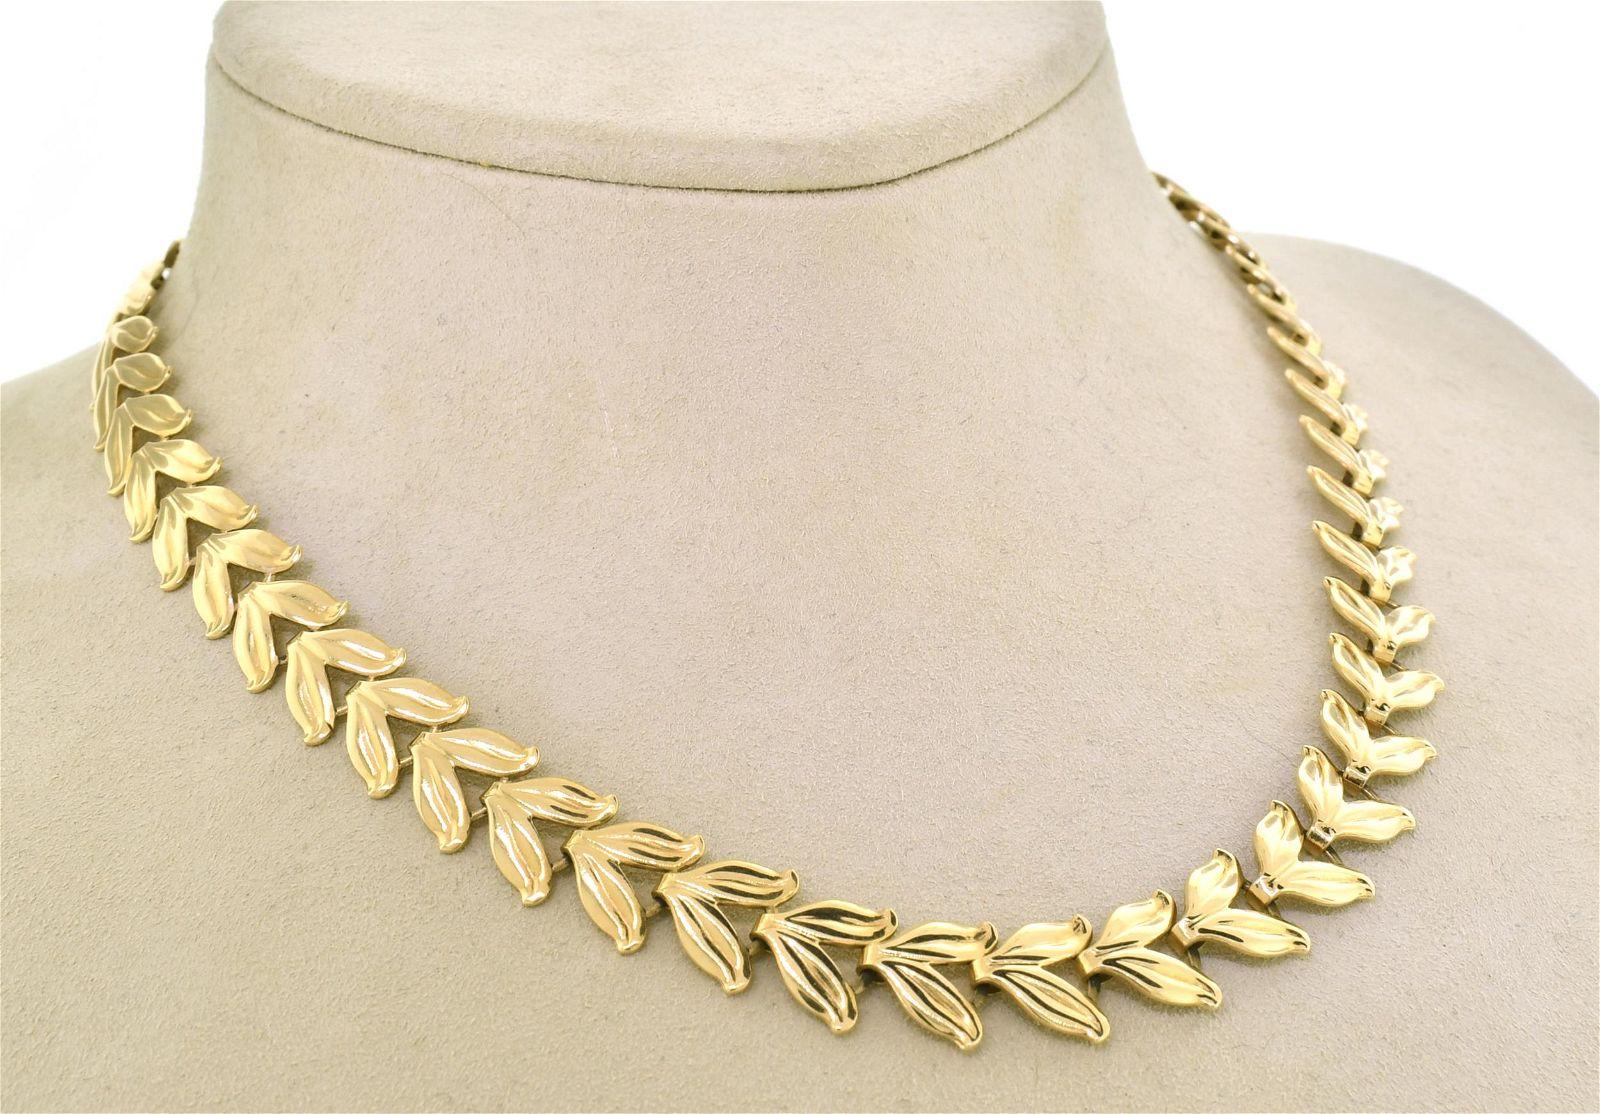 14KG Leaf Design Choker Necklace
Beautiful and elegant vintage heavy 14k yellow gold choker necklace composed of 51 leaf shaped links about 9mm wide and 16 inch long,  weight about 29.2 grams. The clasp is incorporated with large and small ring on